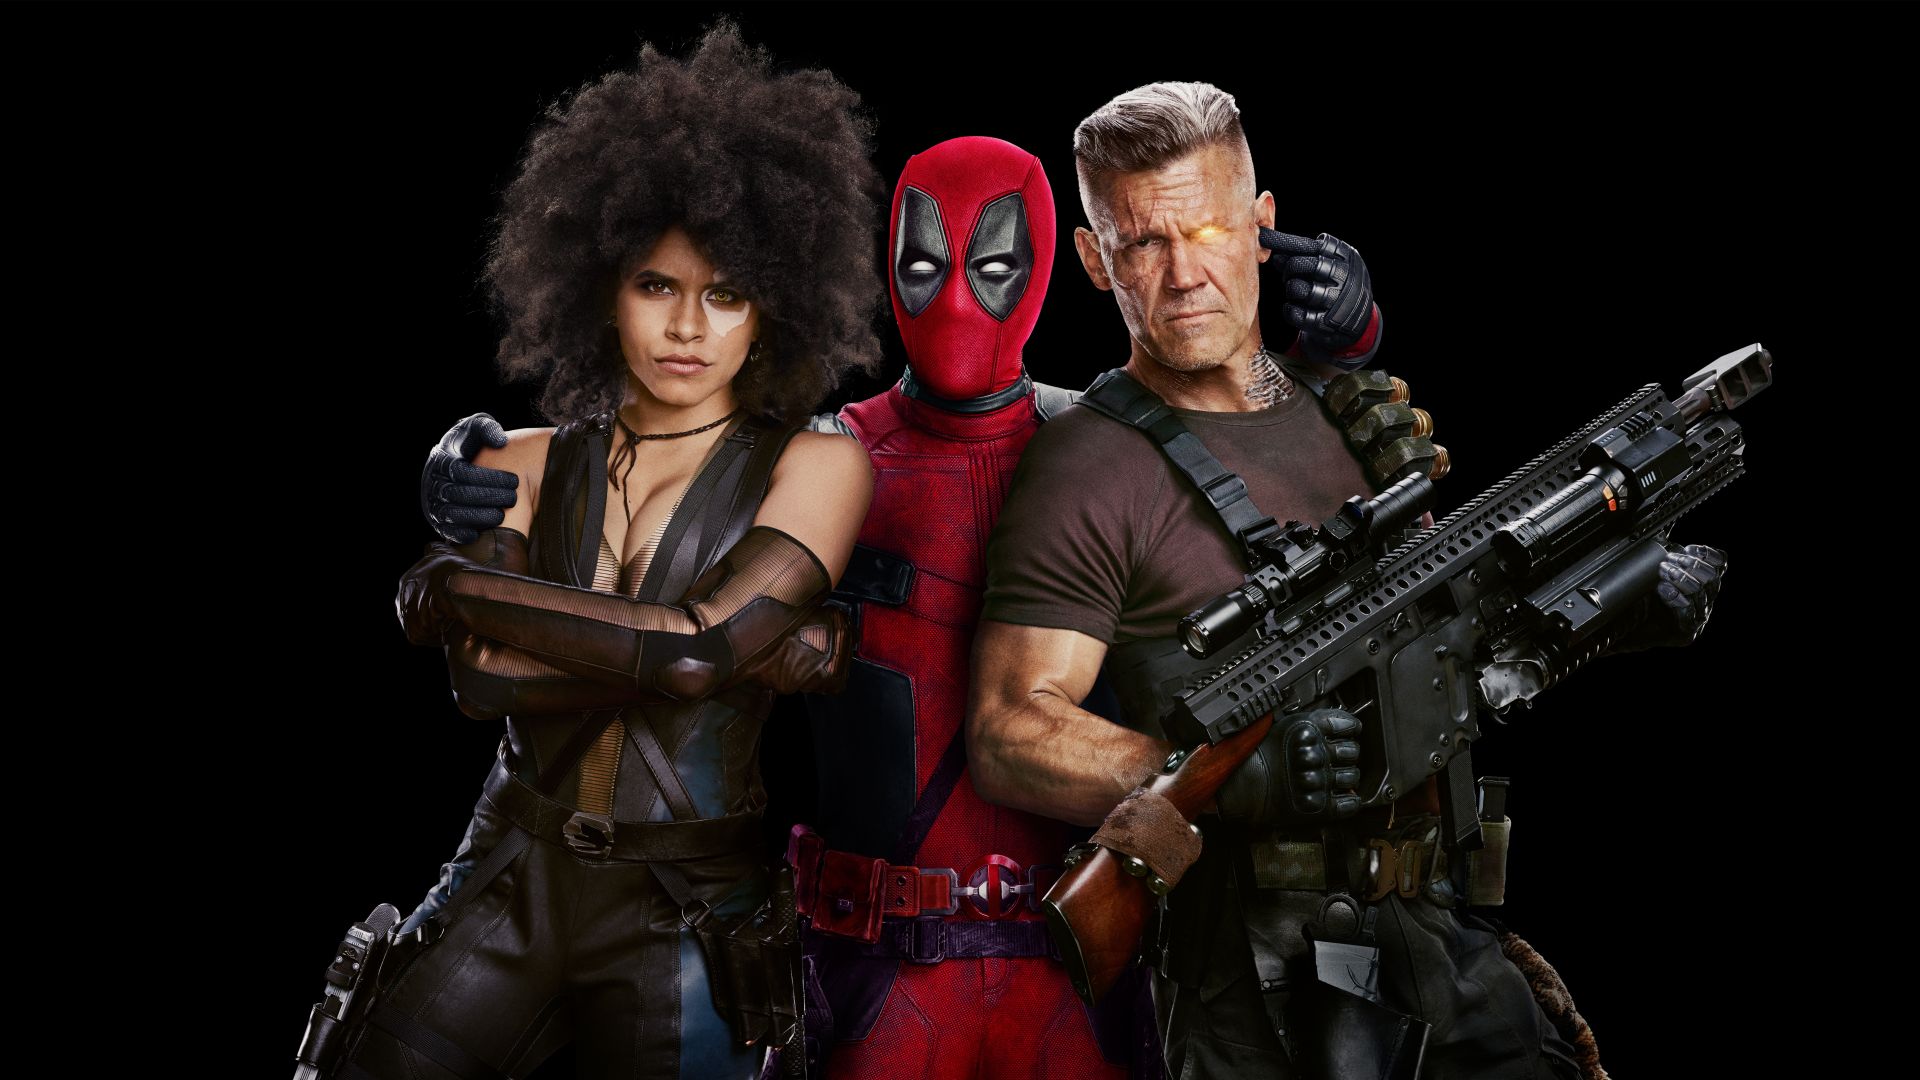 Deadpool 2 Five Reasons Why We Can't Wait to see it - The HotCorn